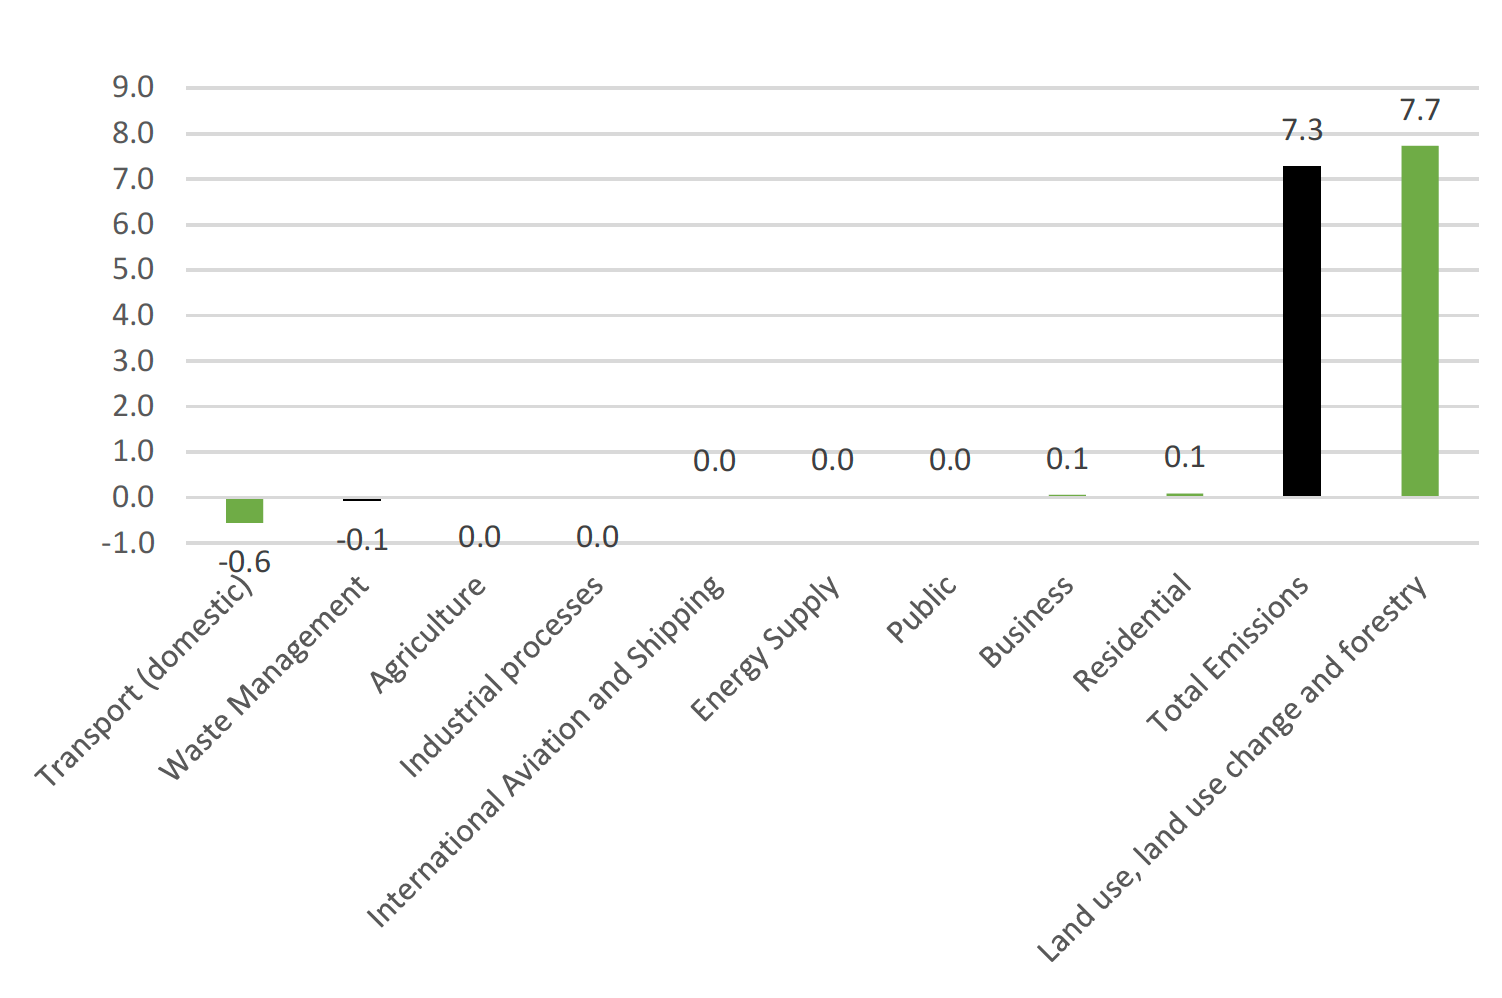 Chart showing scale of revisions between the latest and previous publications by sector to 2018 emissions.